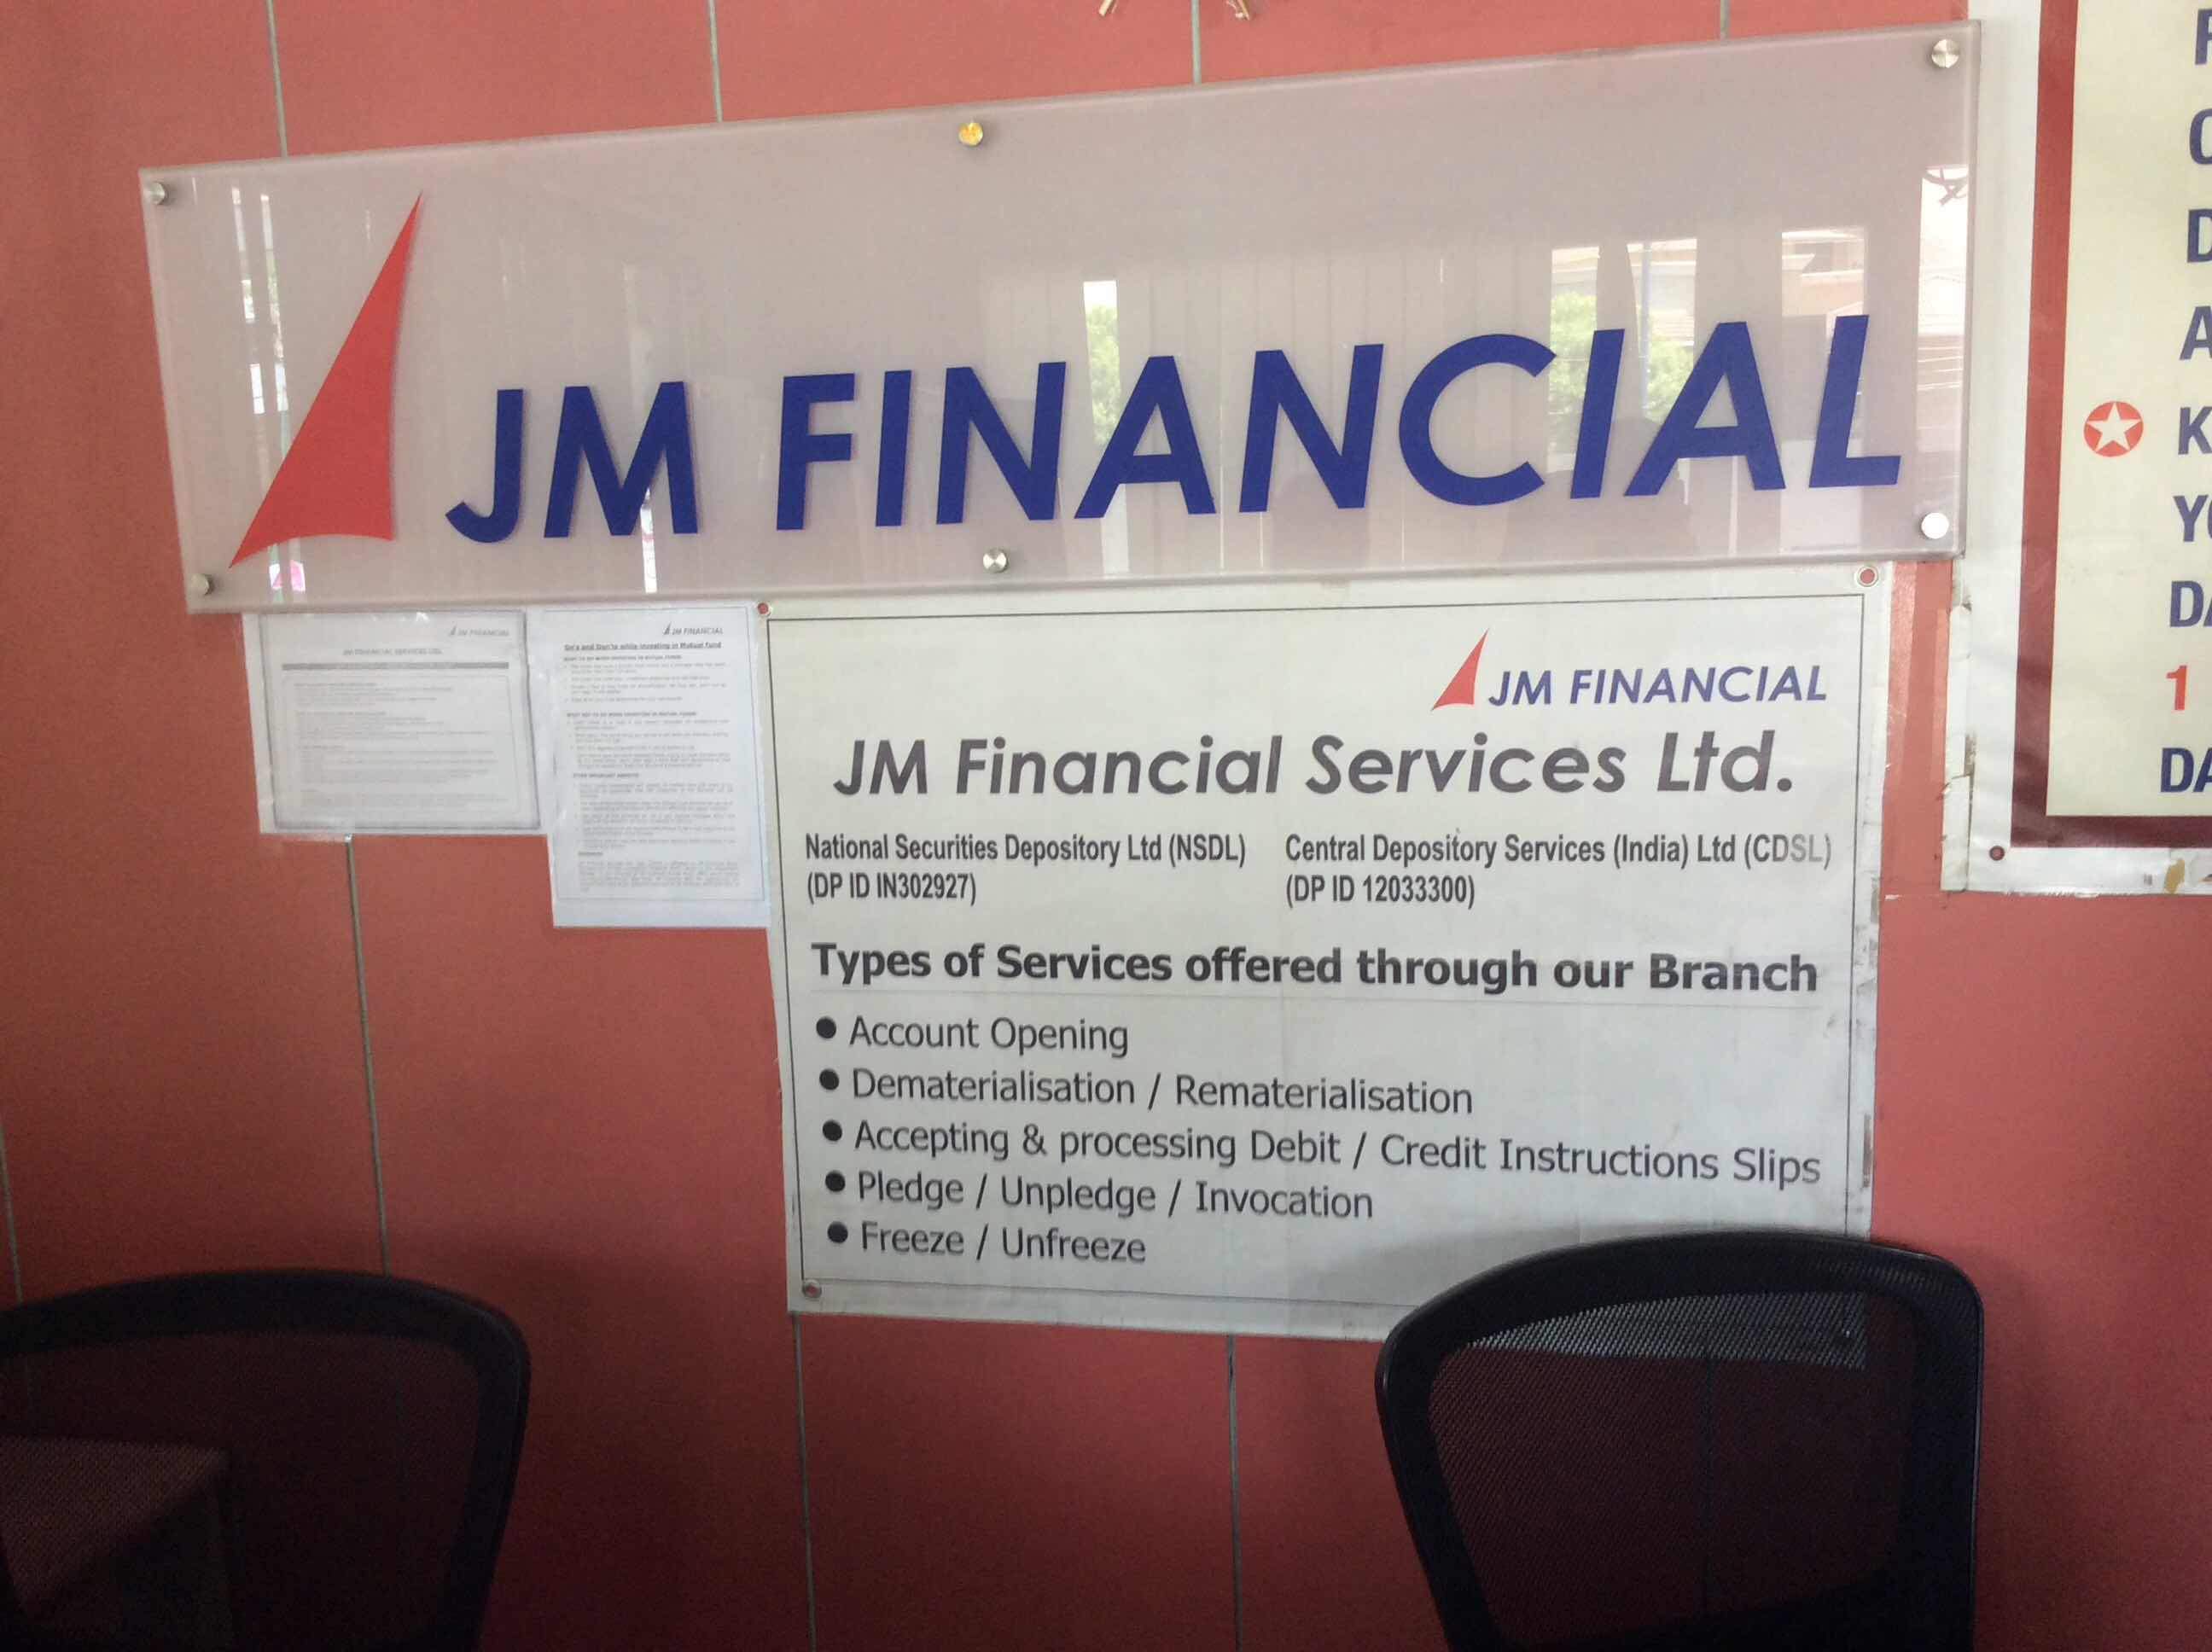 JM Financial arm to raise up to Rs 500 crore